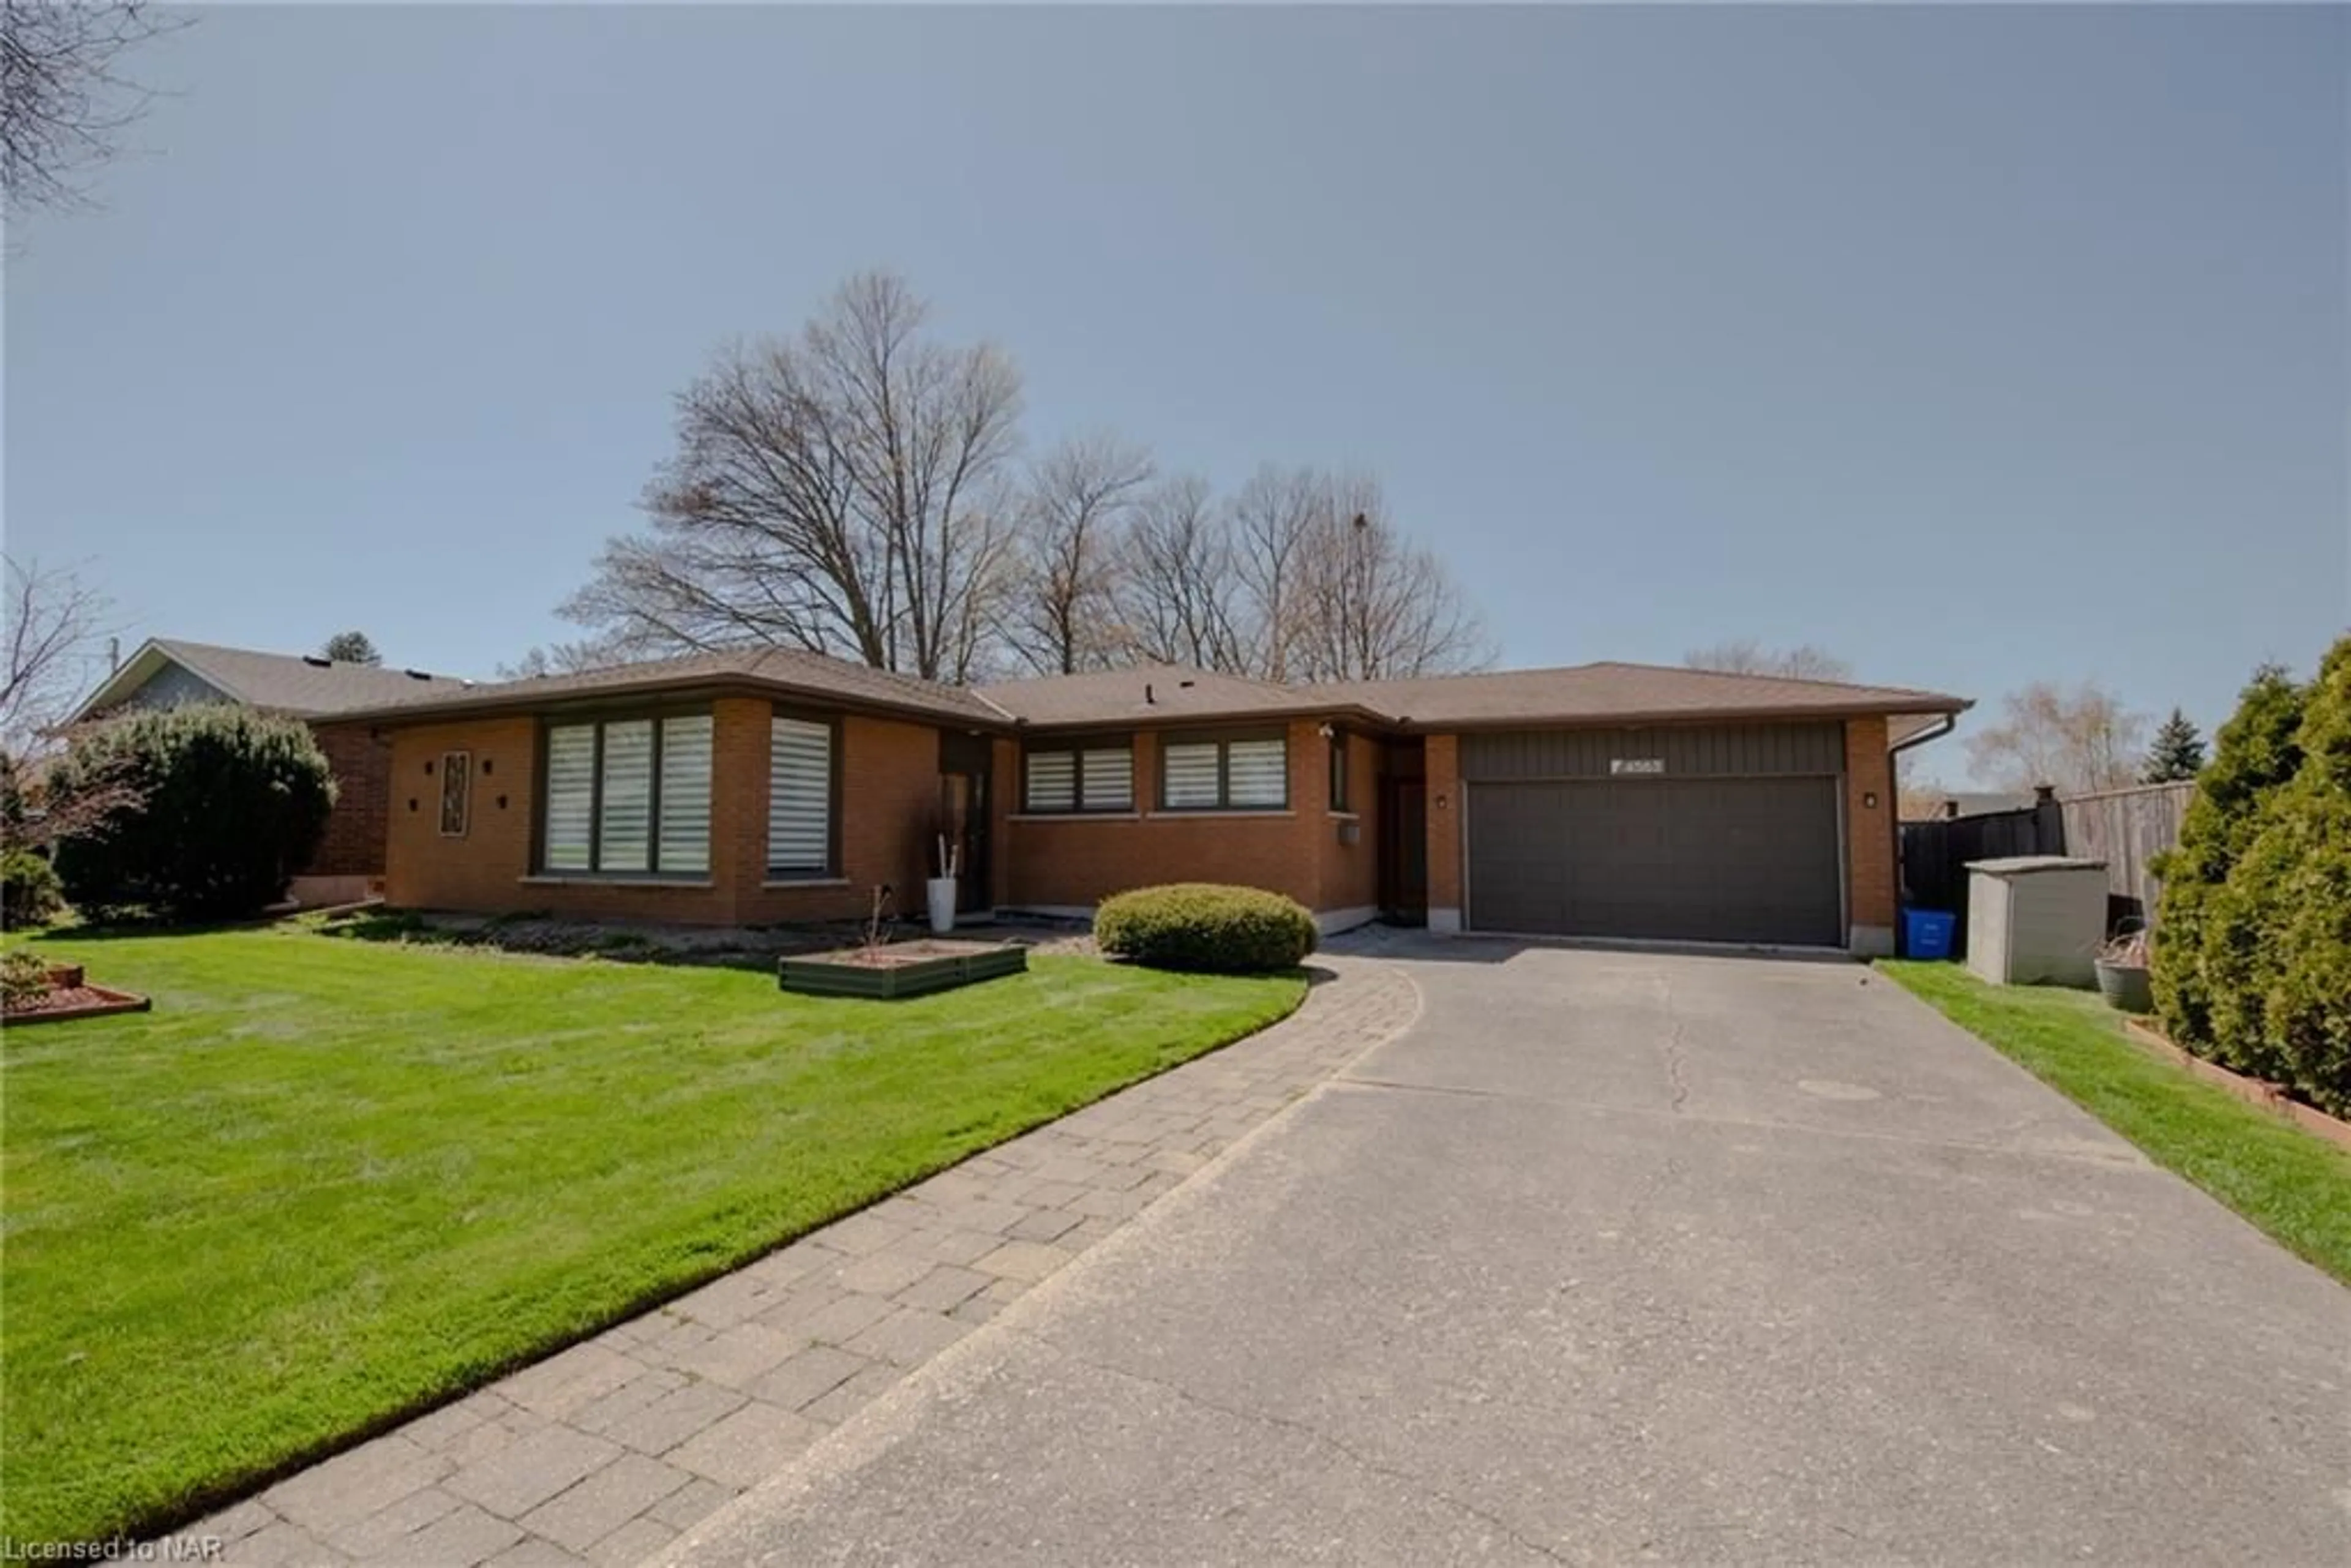 Frontside or backside of a home for 4563 Pinedale Dr, Niagara Falls Ontario L2E 6M6